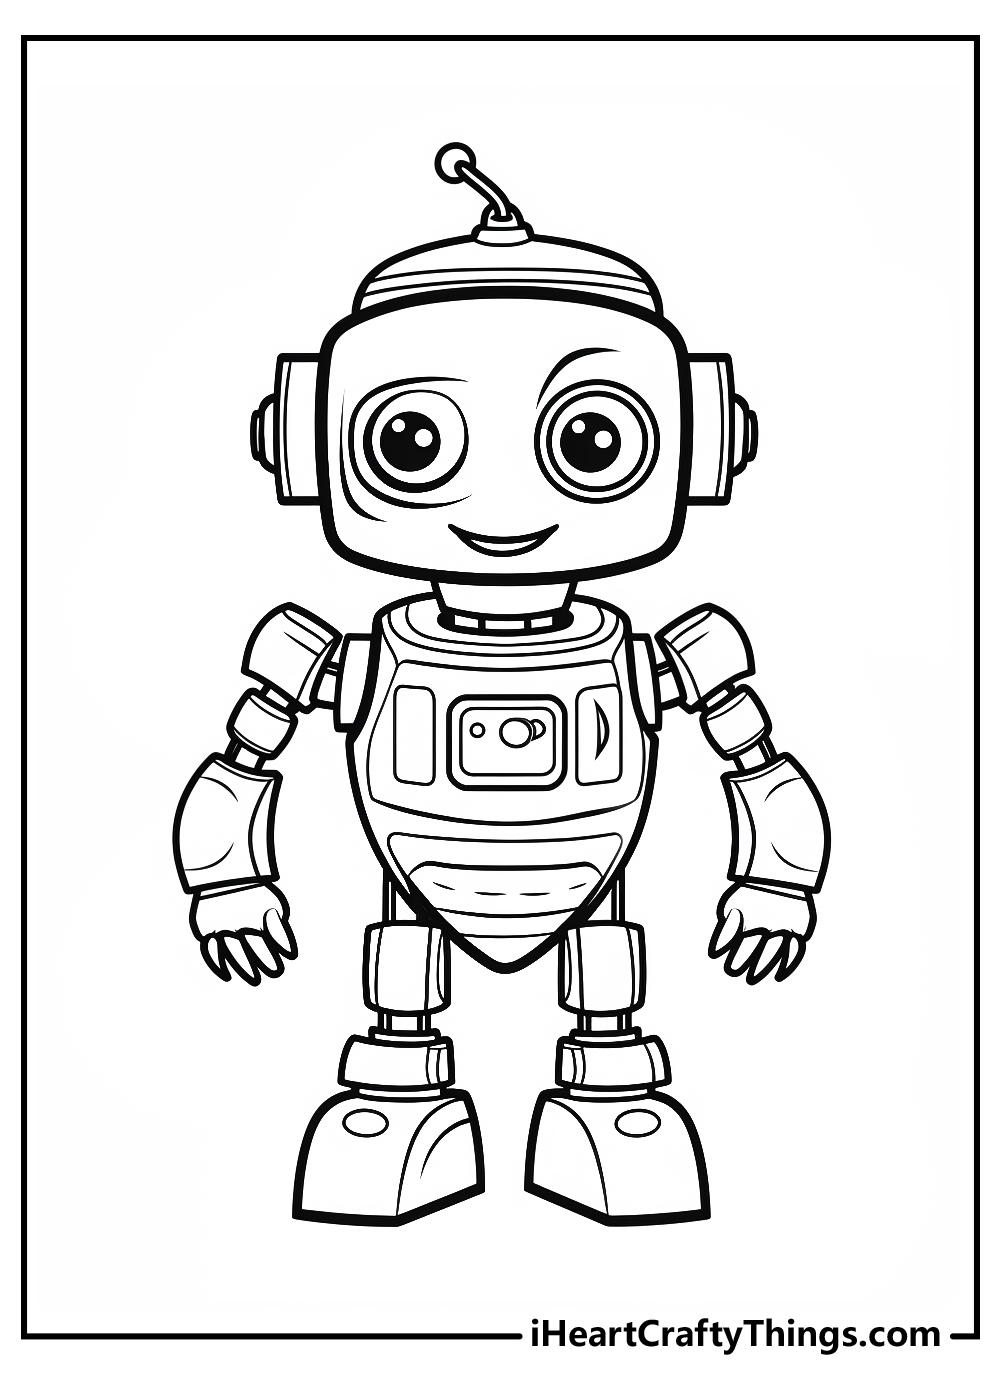 Robot Coloring Book for Kids Toddlers: Robot Coloring Book for Kids (a Really Best Relaxing Coloring Book for Boys, Robot, Fun, Coloring, Boys,  Kids Coloring Books Ages 2-4, 4-8, 9-12, Special Gift for Technology Robotics Lover Kids) [Book]